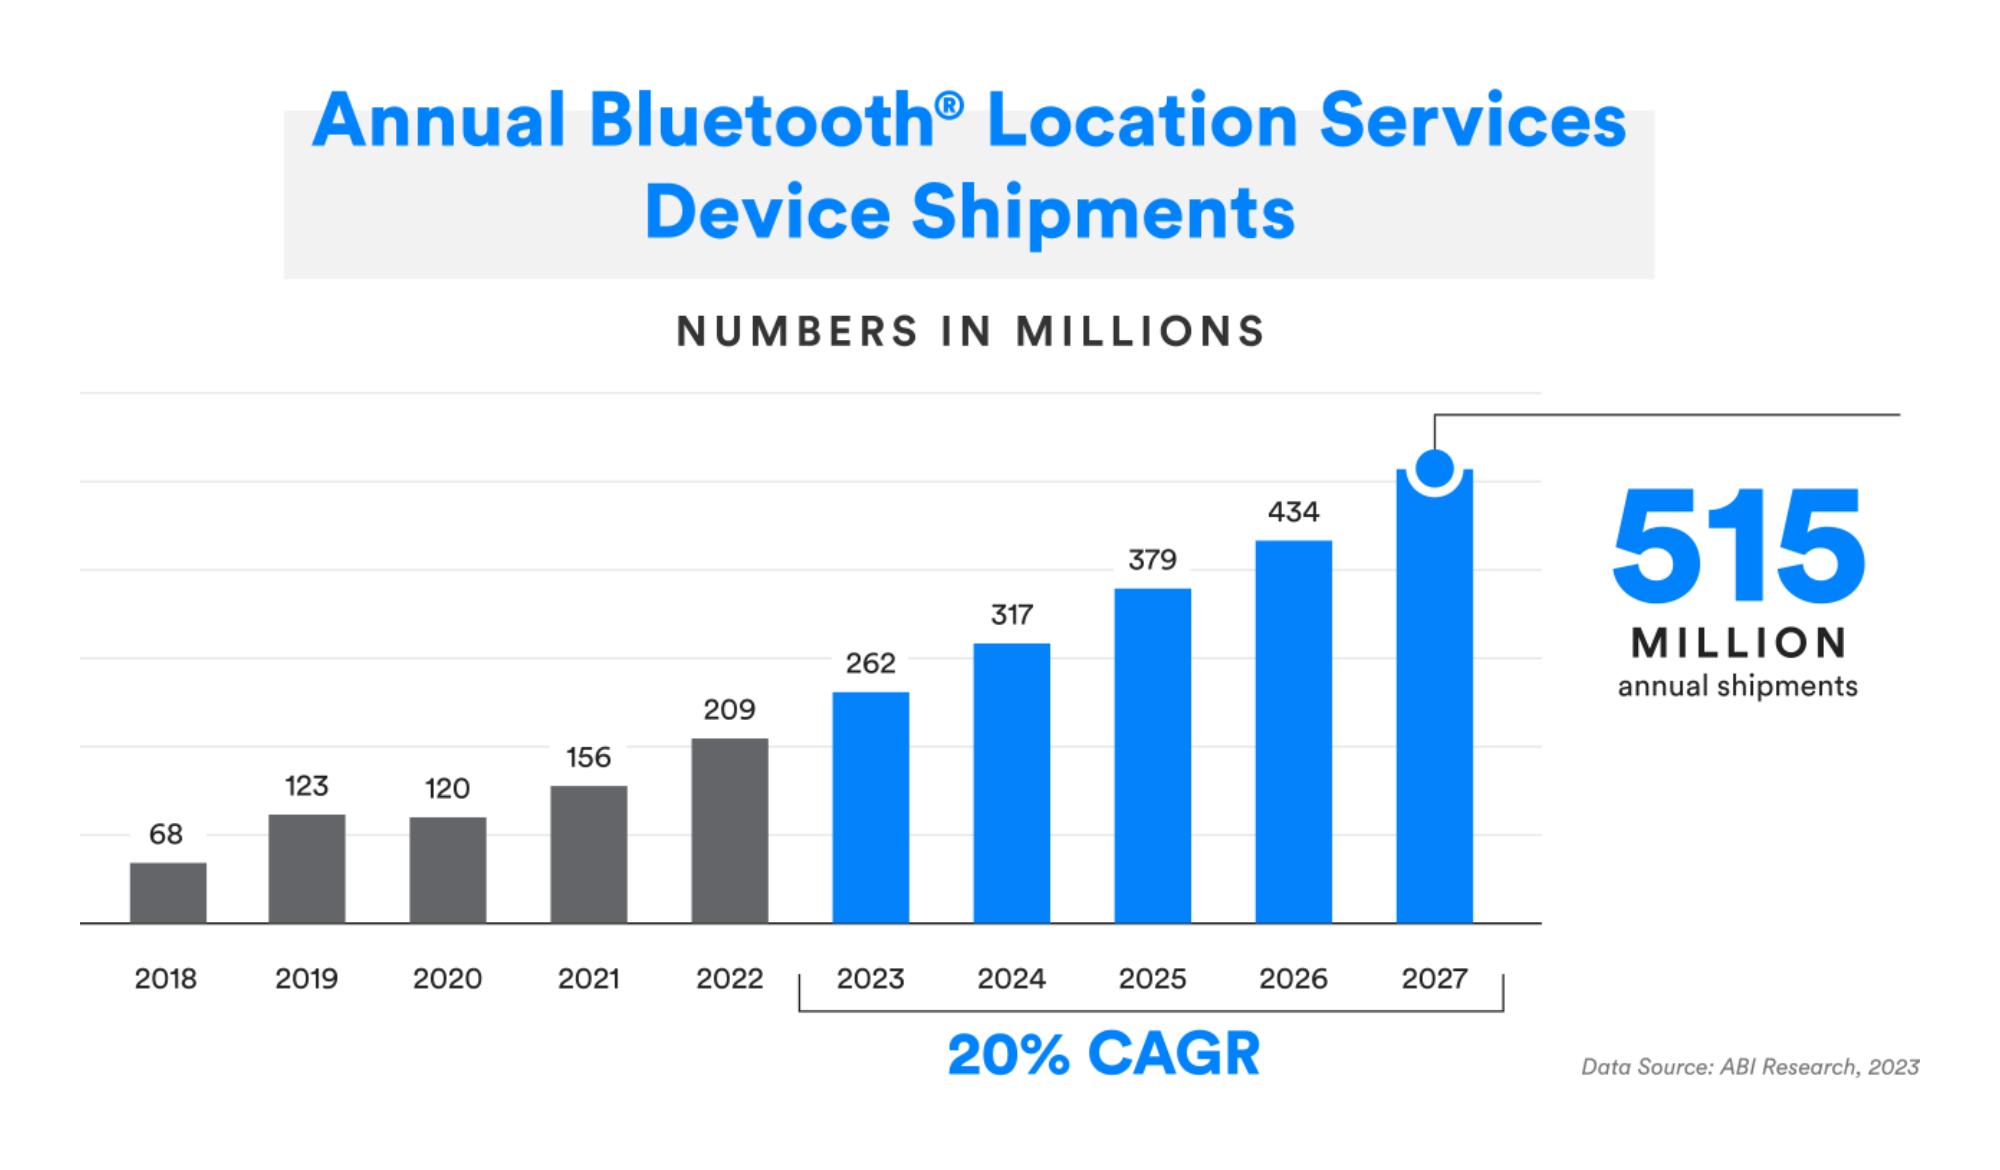 bluetooth location services shipments